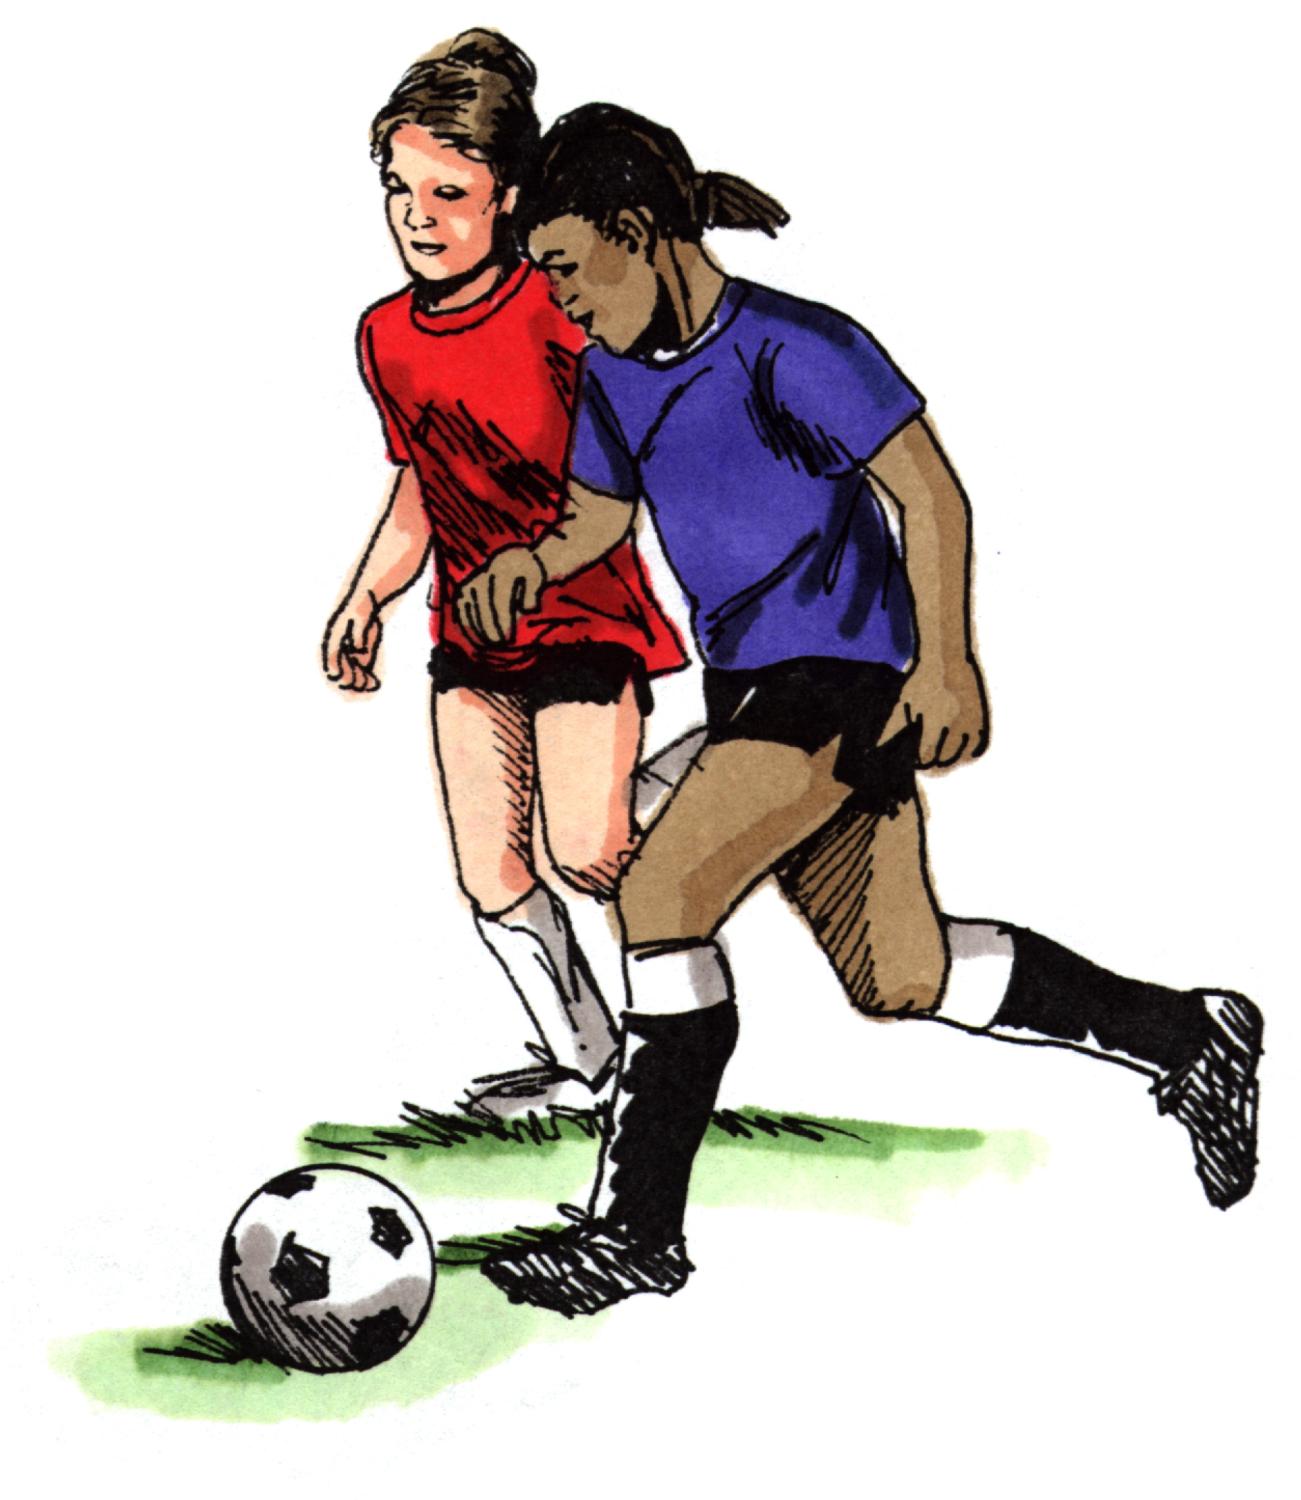 Youth Soccer Clinics | NORTH COUNTY SPORTS